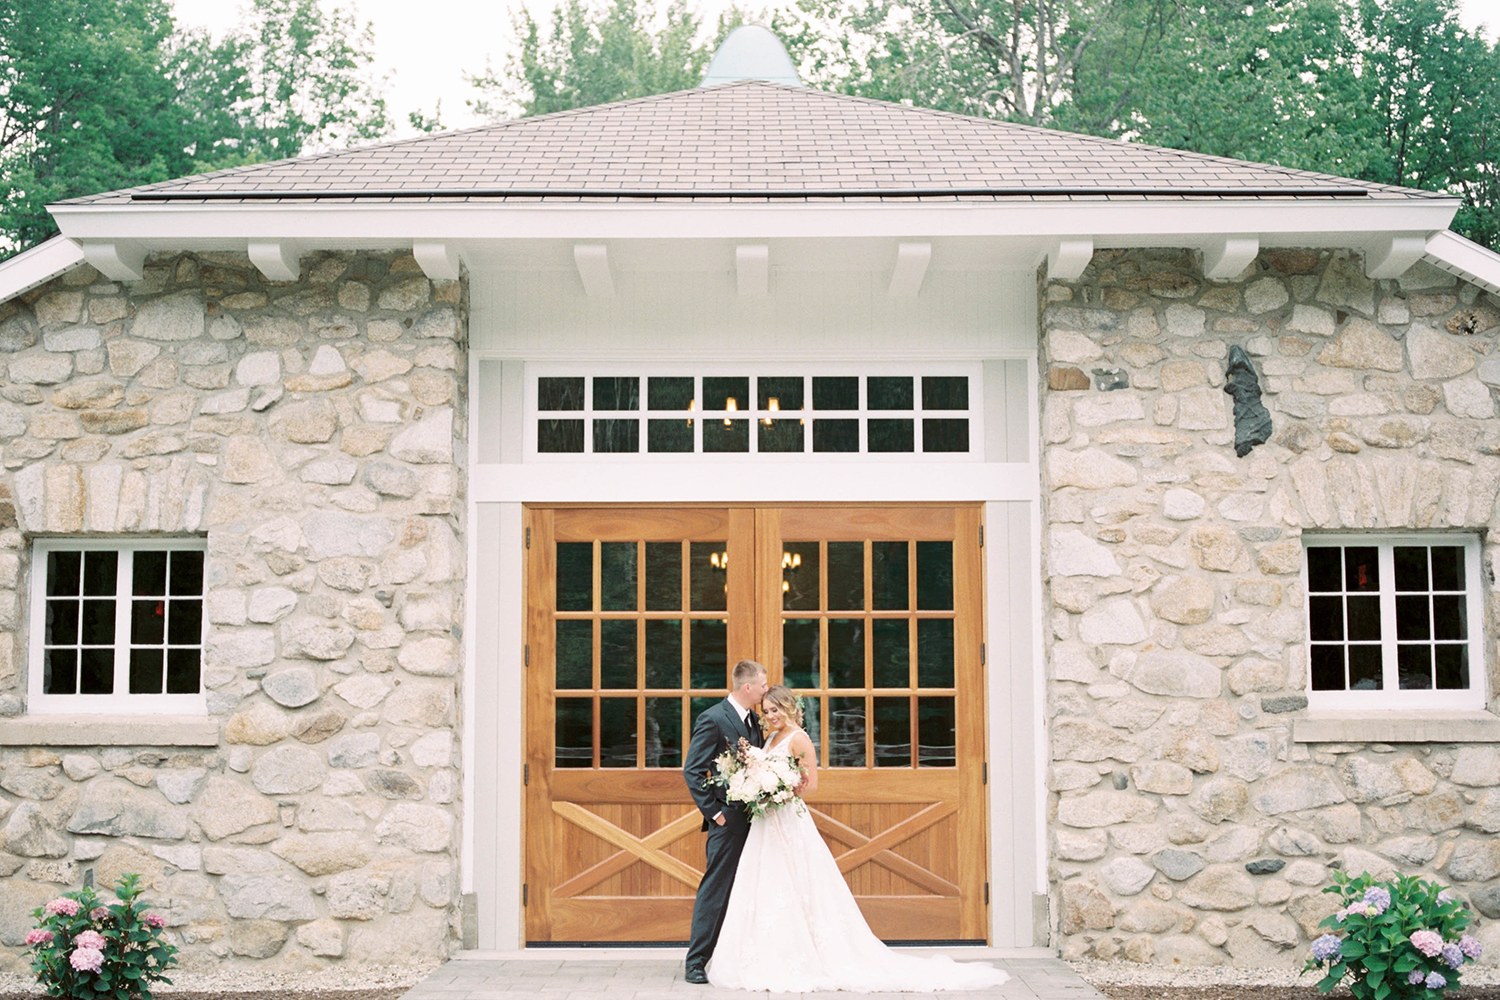 Have your wedding at our historic stone barn